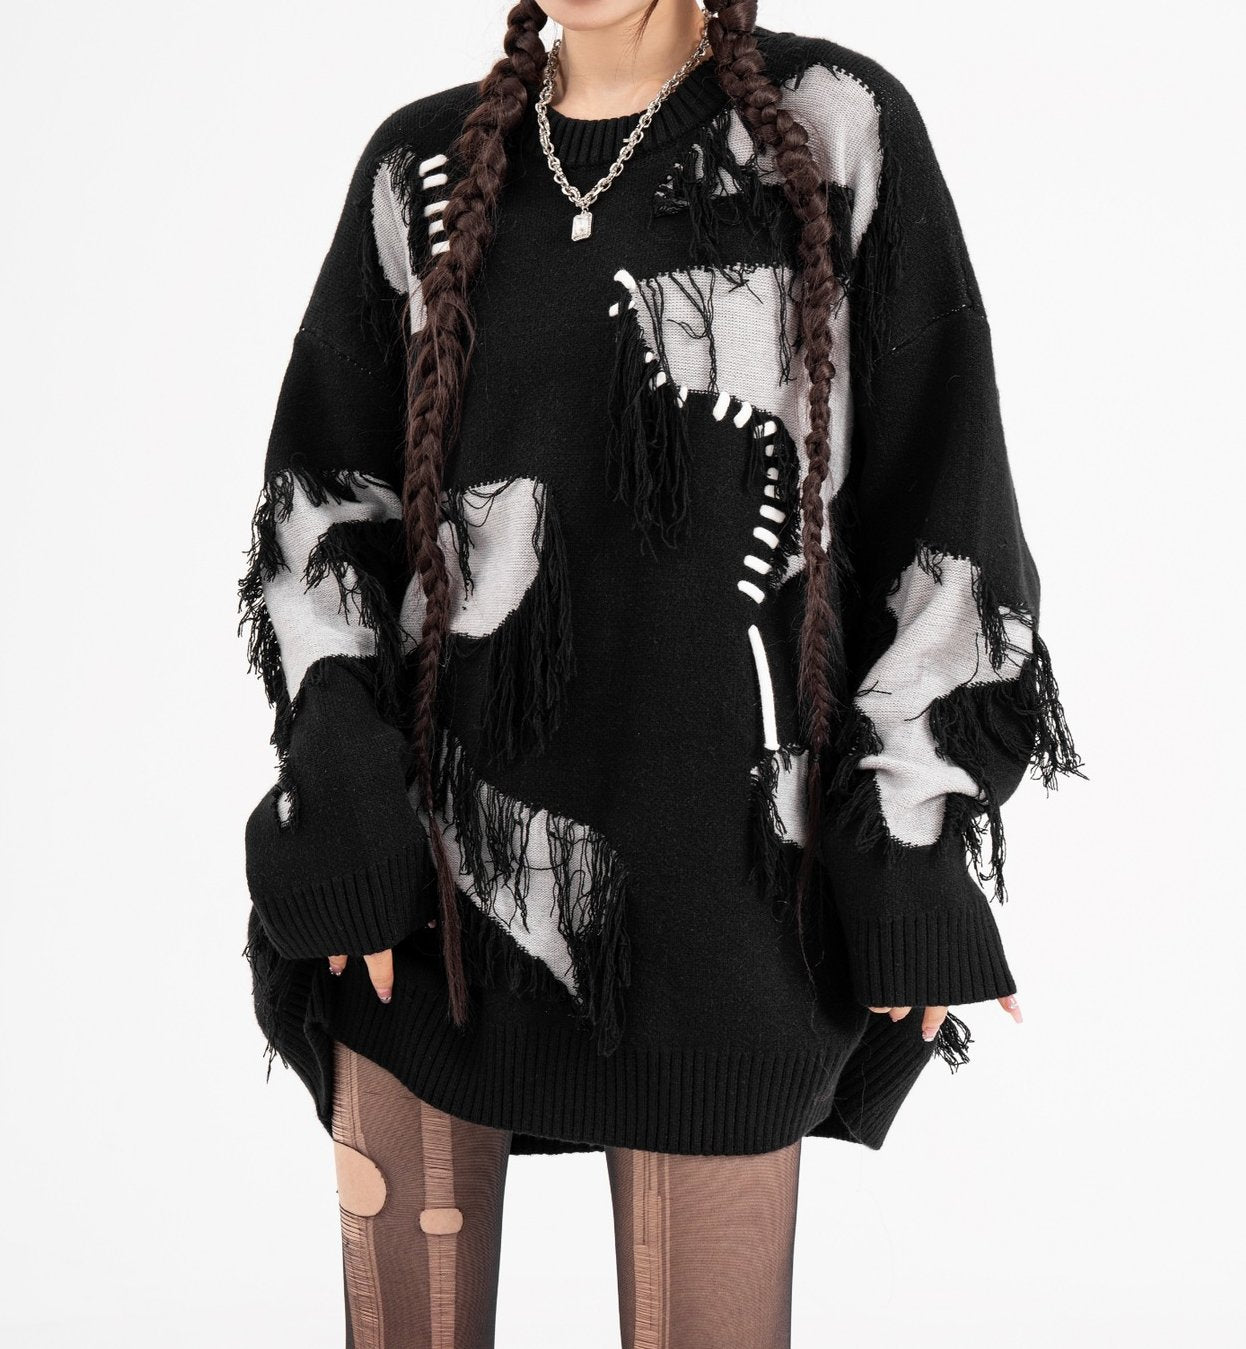 Unisex Fringed Rope Patchwork Knitted Sweater